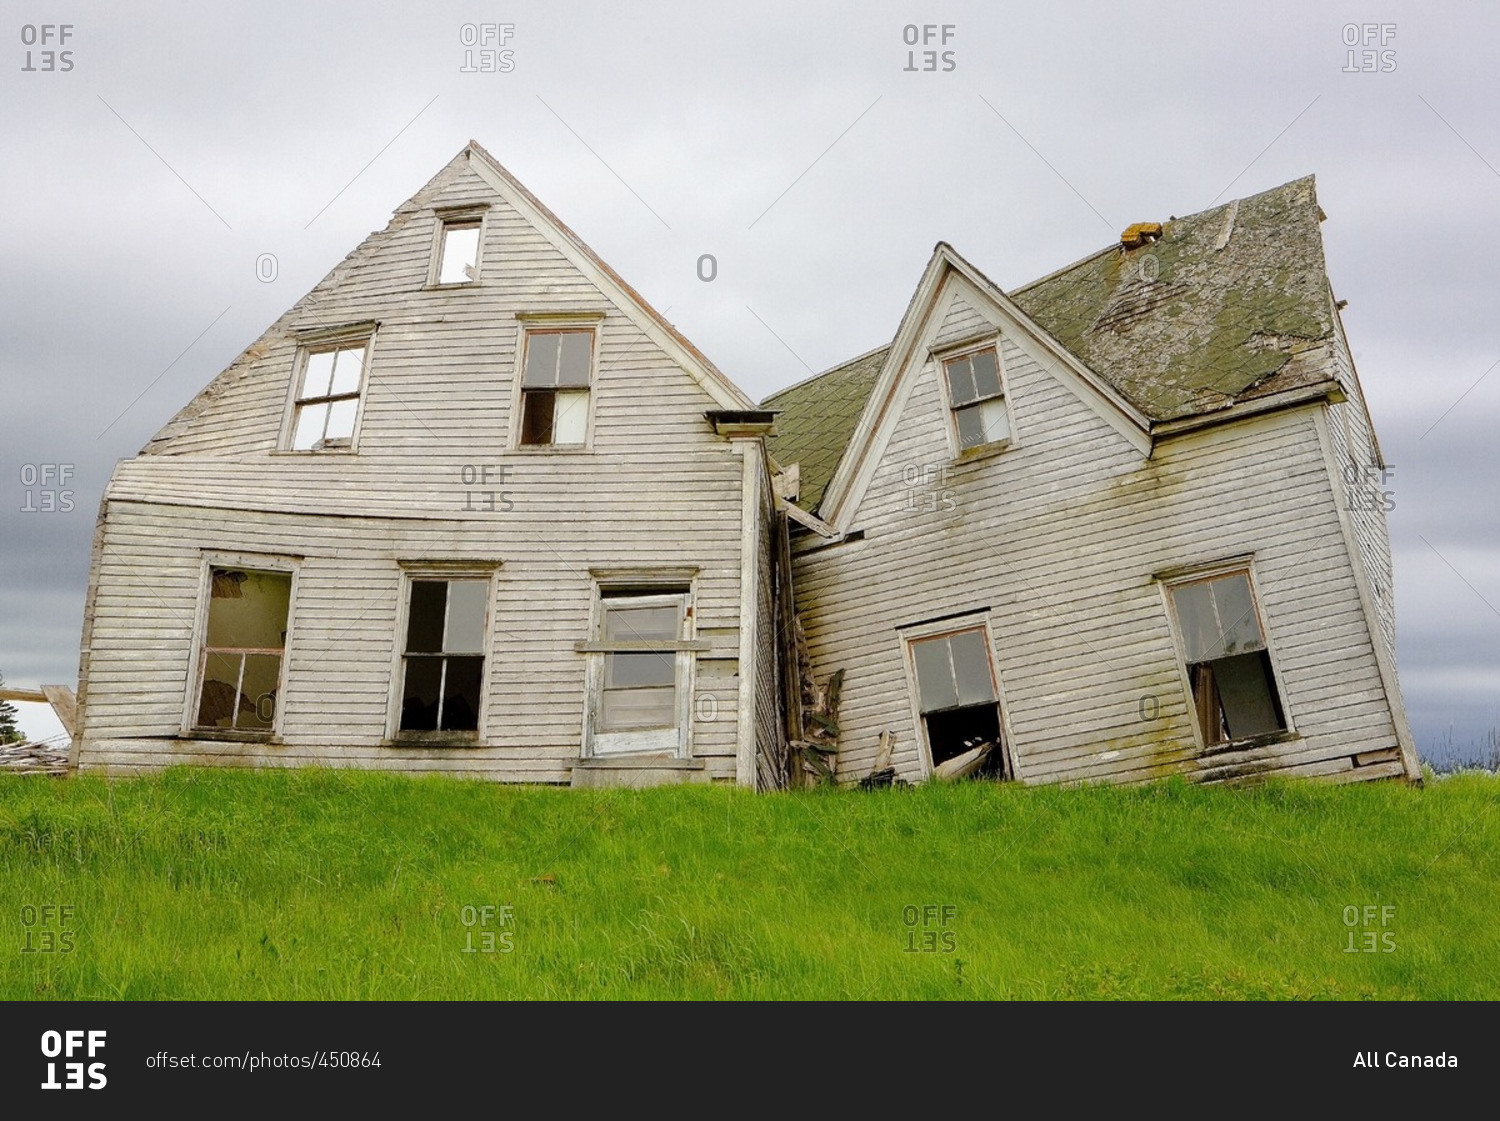 Collapsed and abandoned house, Kings County, Prince Edward Island, Canada